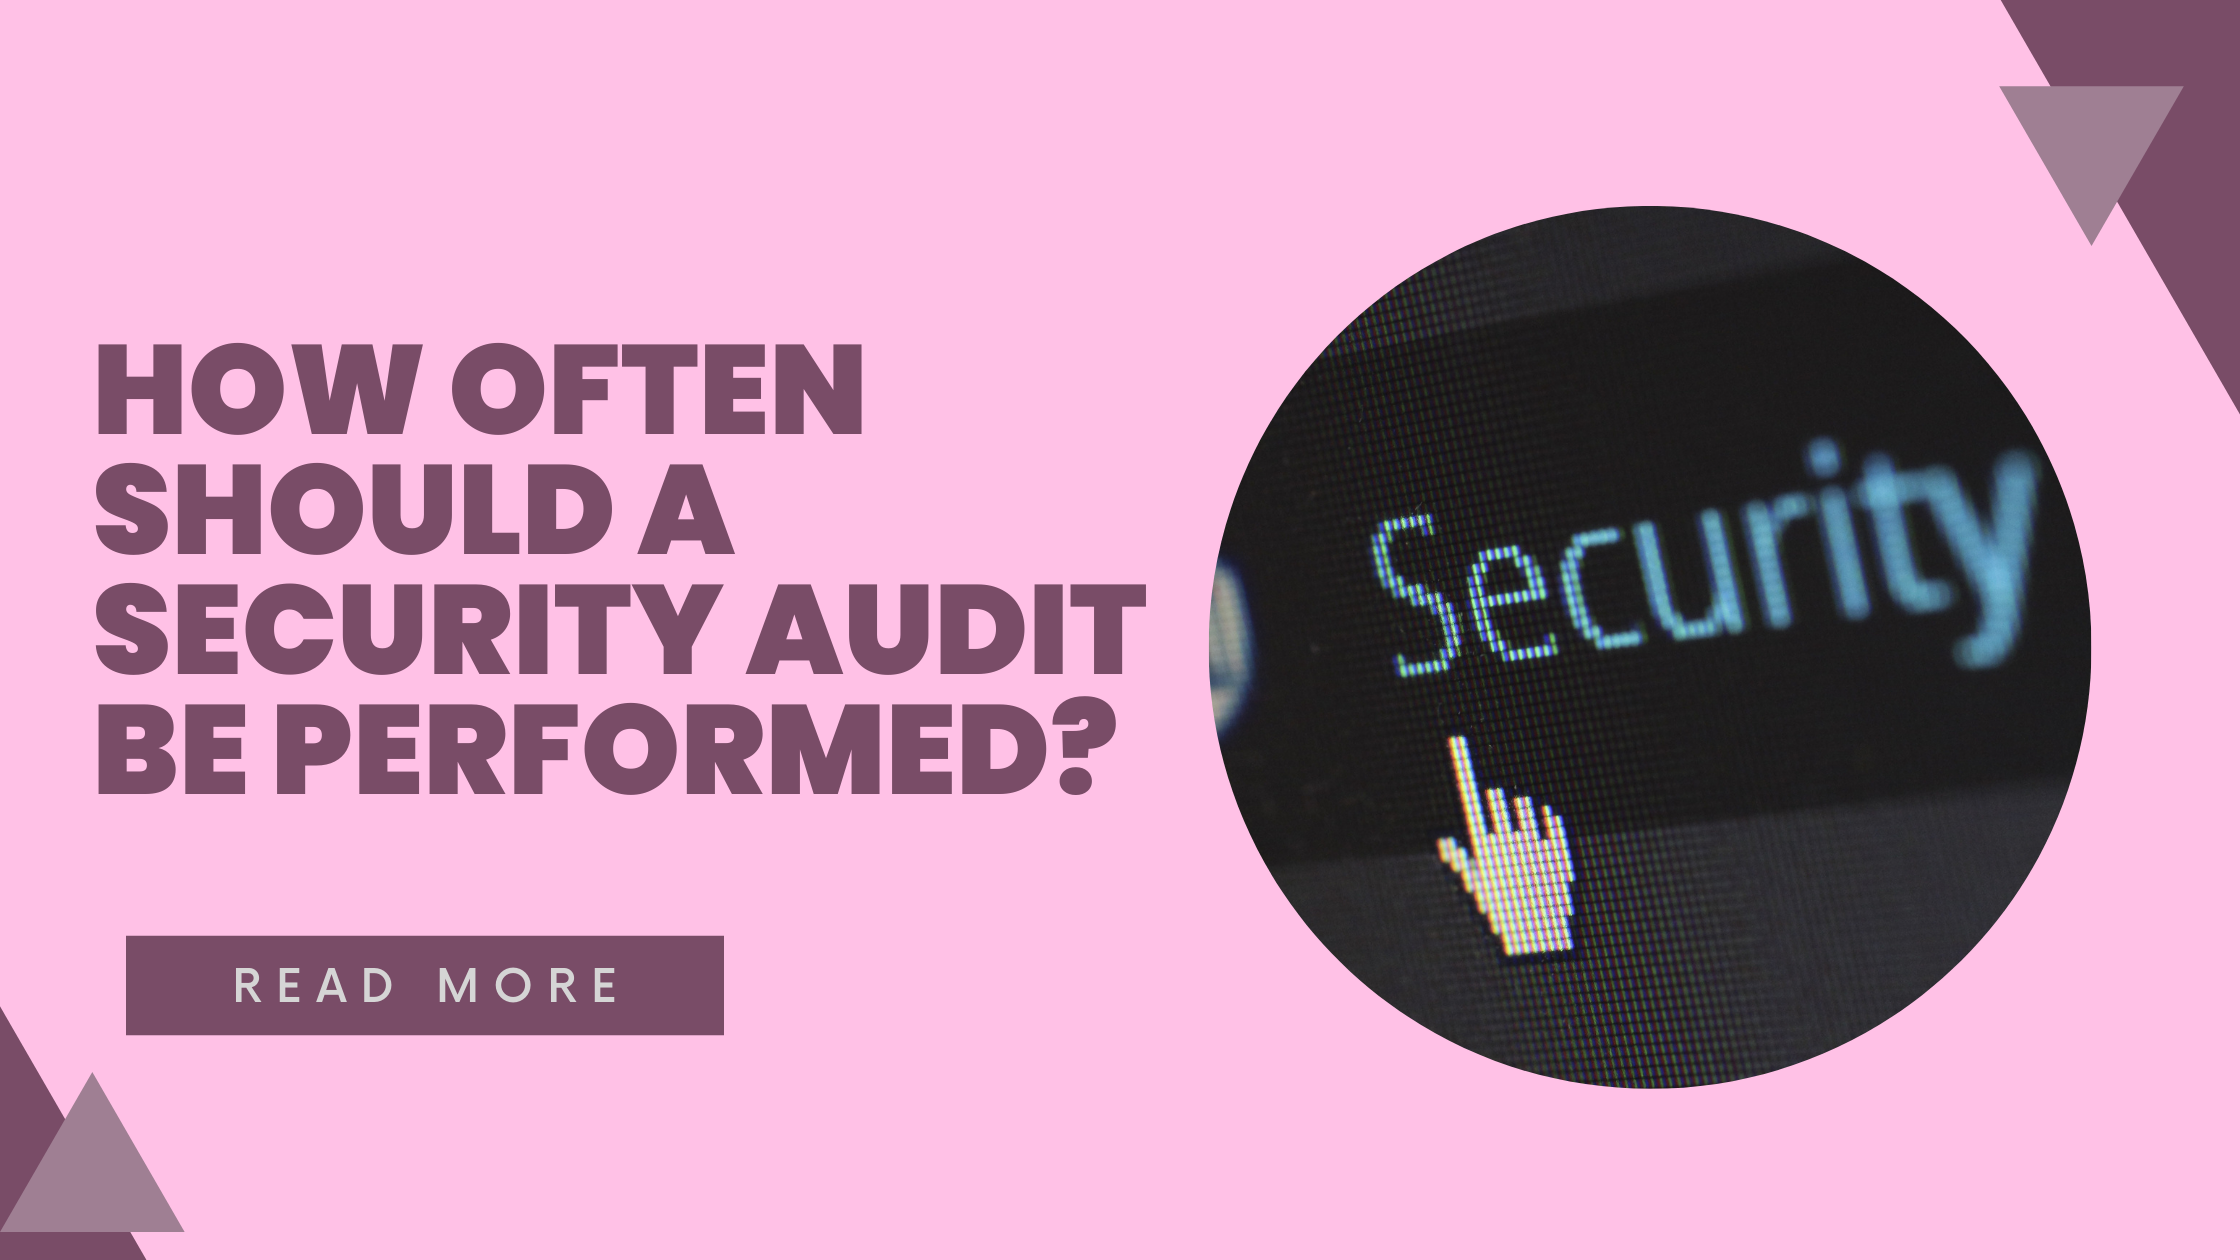 How often should a security audit be performed?